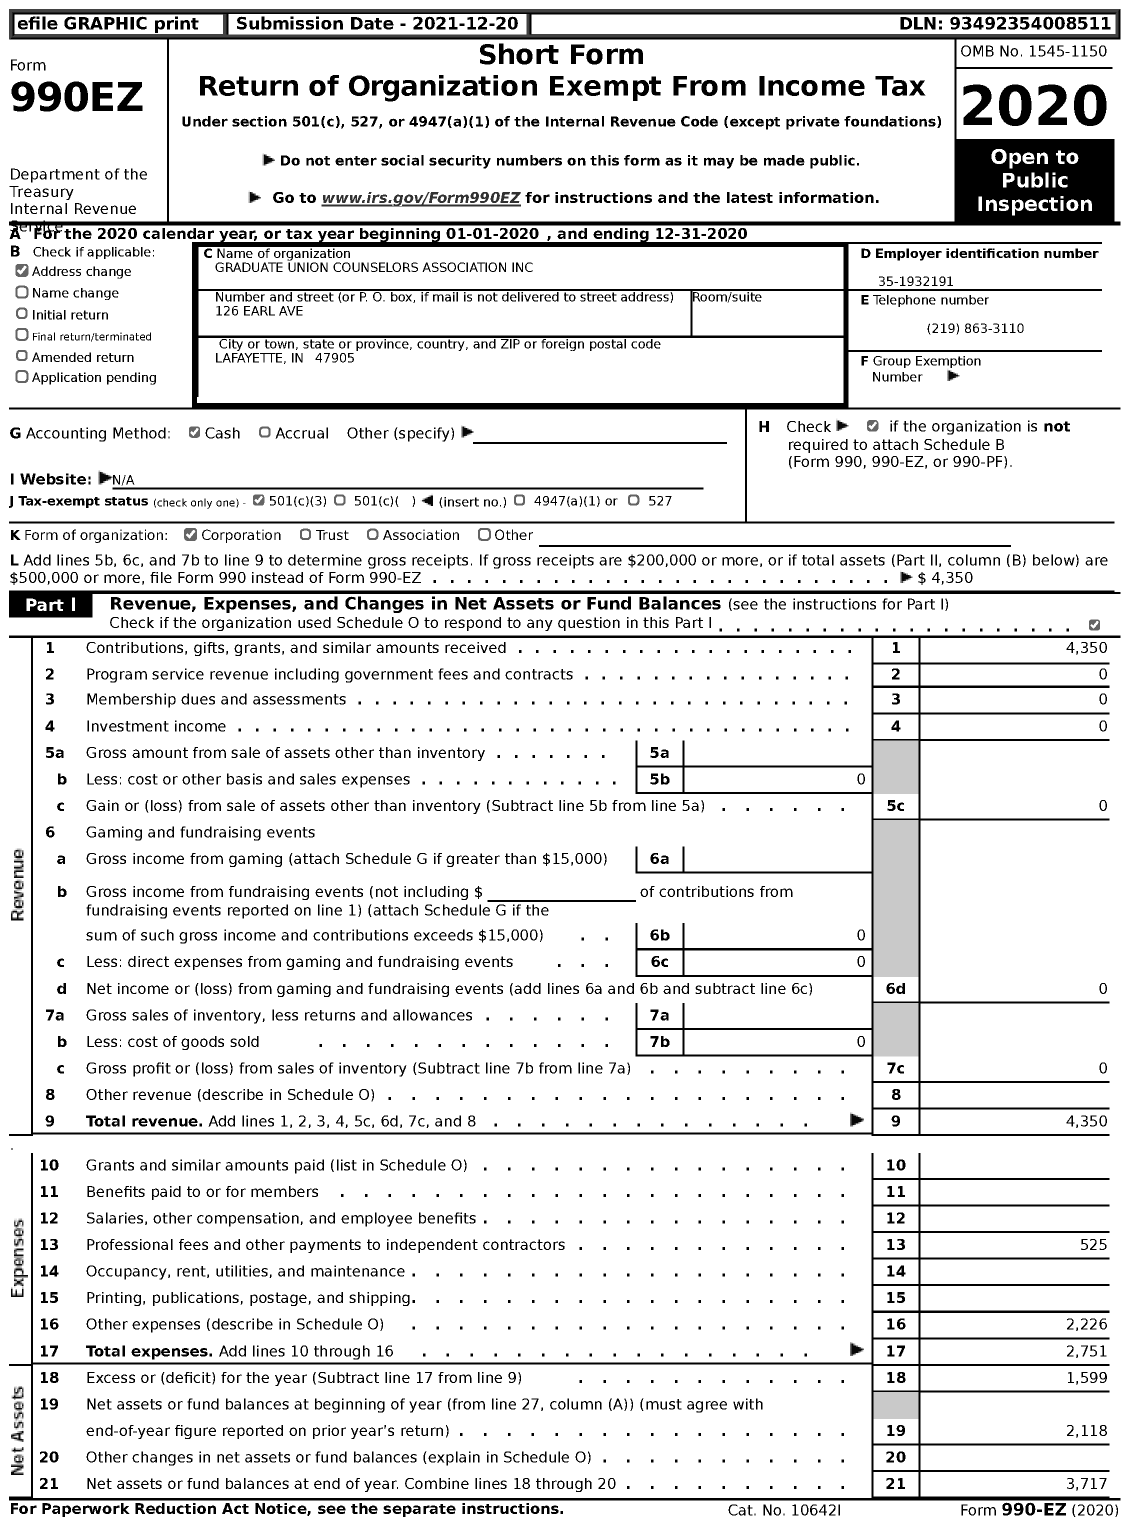 Image of first page of 2020 Form 990EZ for Graduate Union Counselors Association